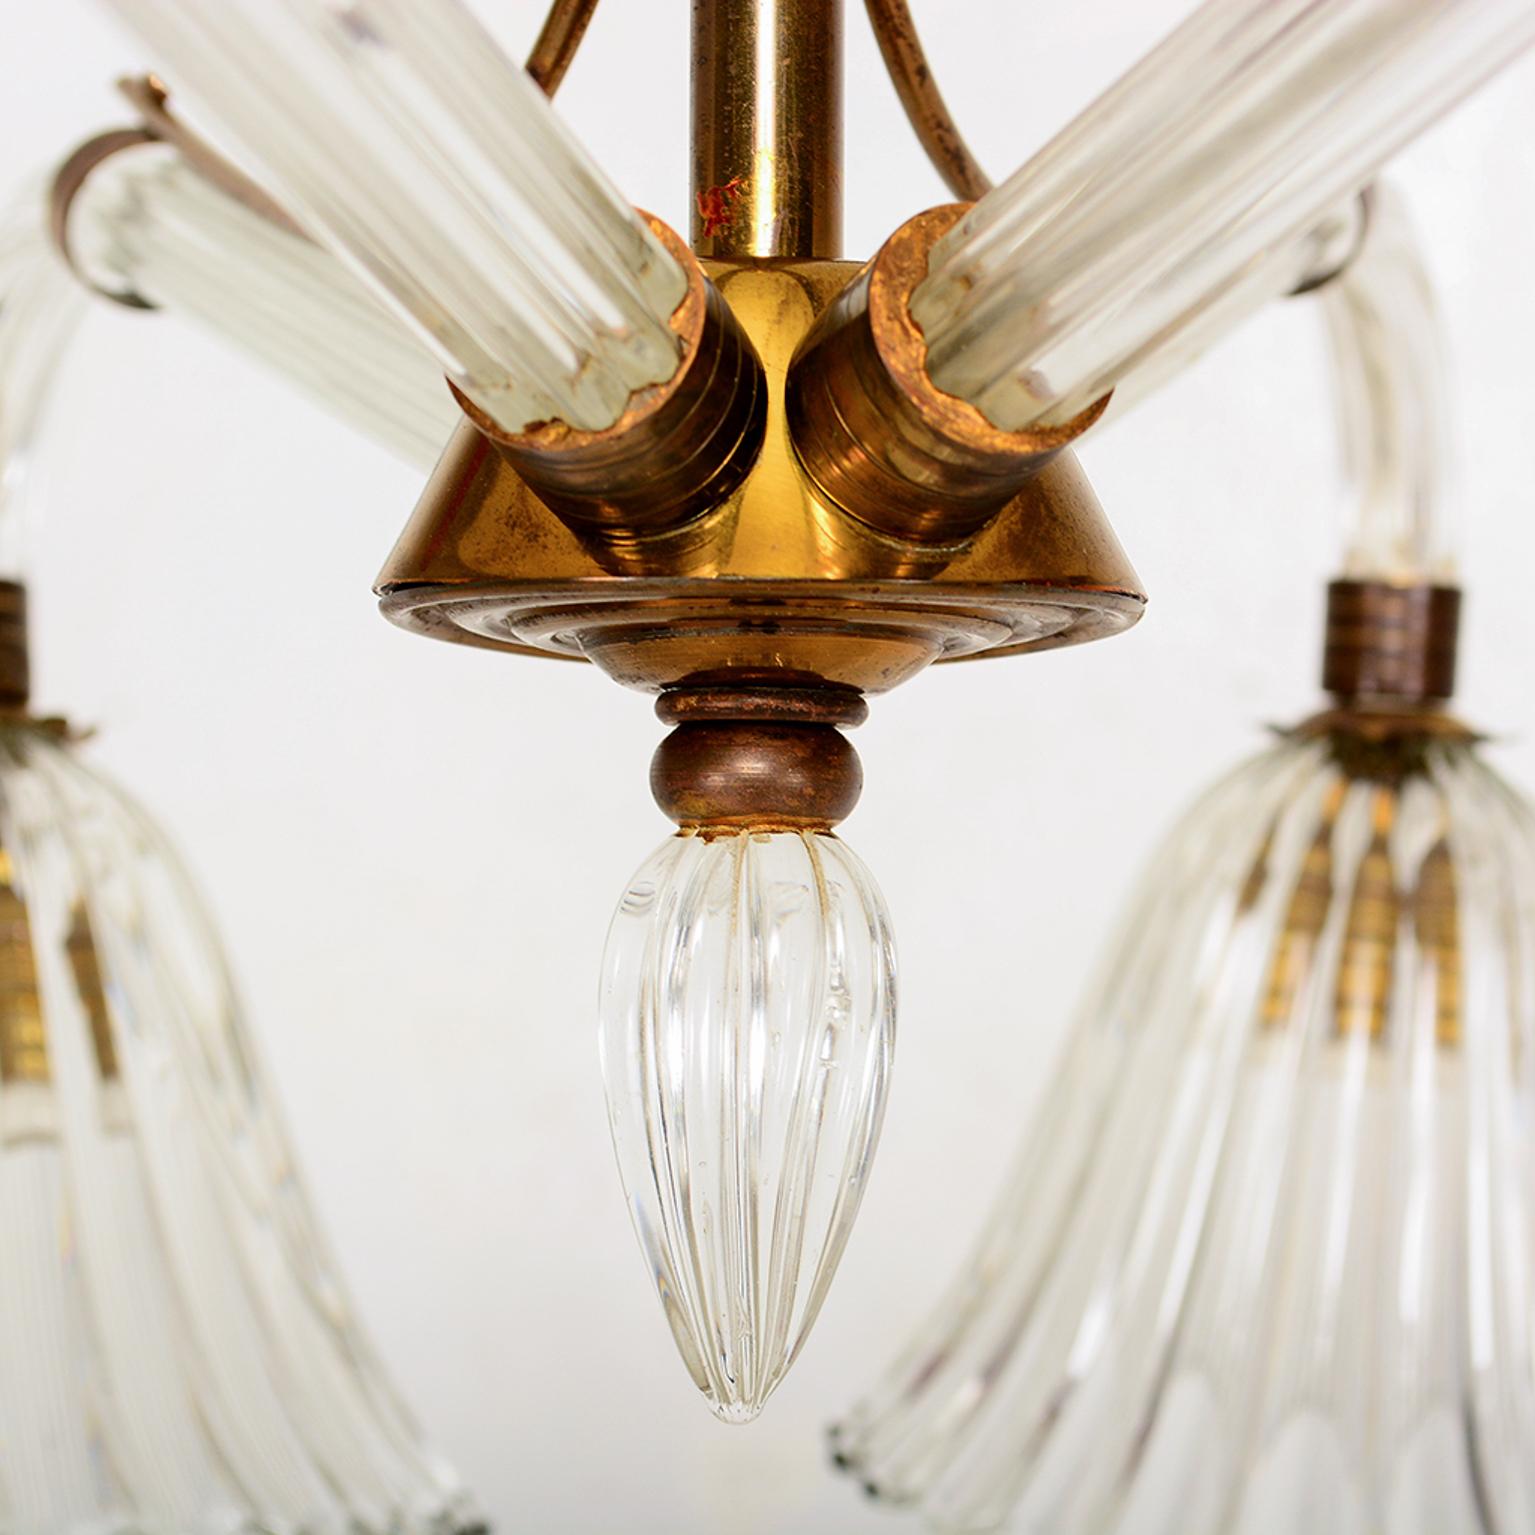 AMBIANIC presents
Translucent Venetian Murano Glass Hanging Chandelier with Brass accents.
Unmarked. Style of Ercole Barovier Art Deco design of Barovier Seguso & Ferro. ITALY 1940s
Chandelier has been rewired. It requires four regular bulbs.
One